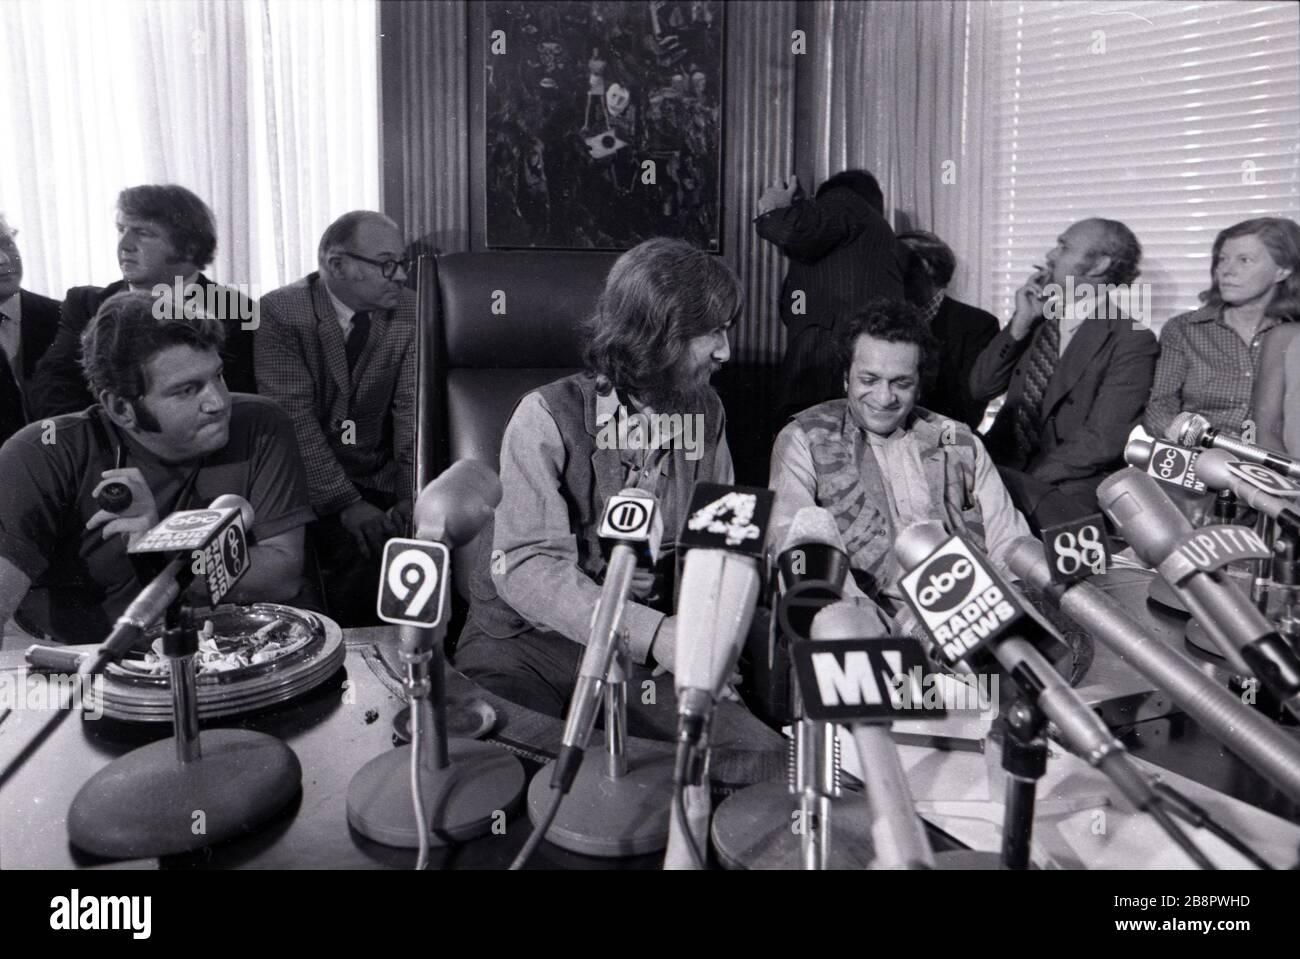 Beatles' guitarist George Harrison and sitar legend Ravi Shankar hold a press conference announcing their beneift concert and album to aid victims of famine and war in Bangladesh, known as 'The Concert for Bangladesh.'  The event is held at Allen Klein's ABKCO offices in midtown Manhattan on July 27, 1971 in New York, NY.  Credit: Rock Negatives / MediaPunch Stock Photo